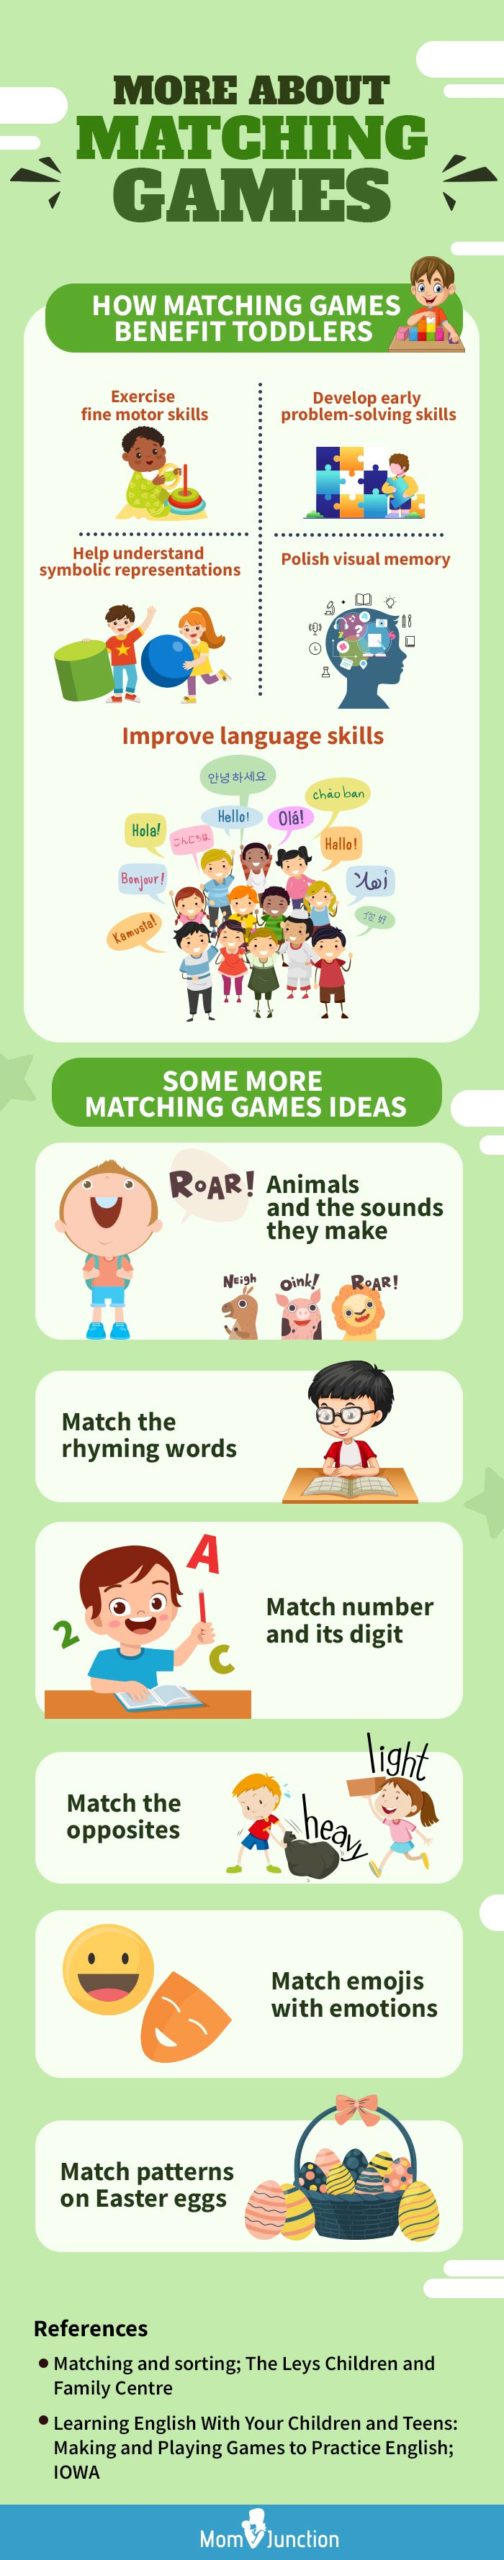 more about matching games for toddlers [infographic]